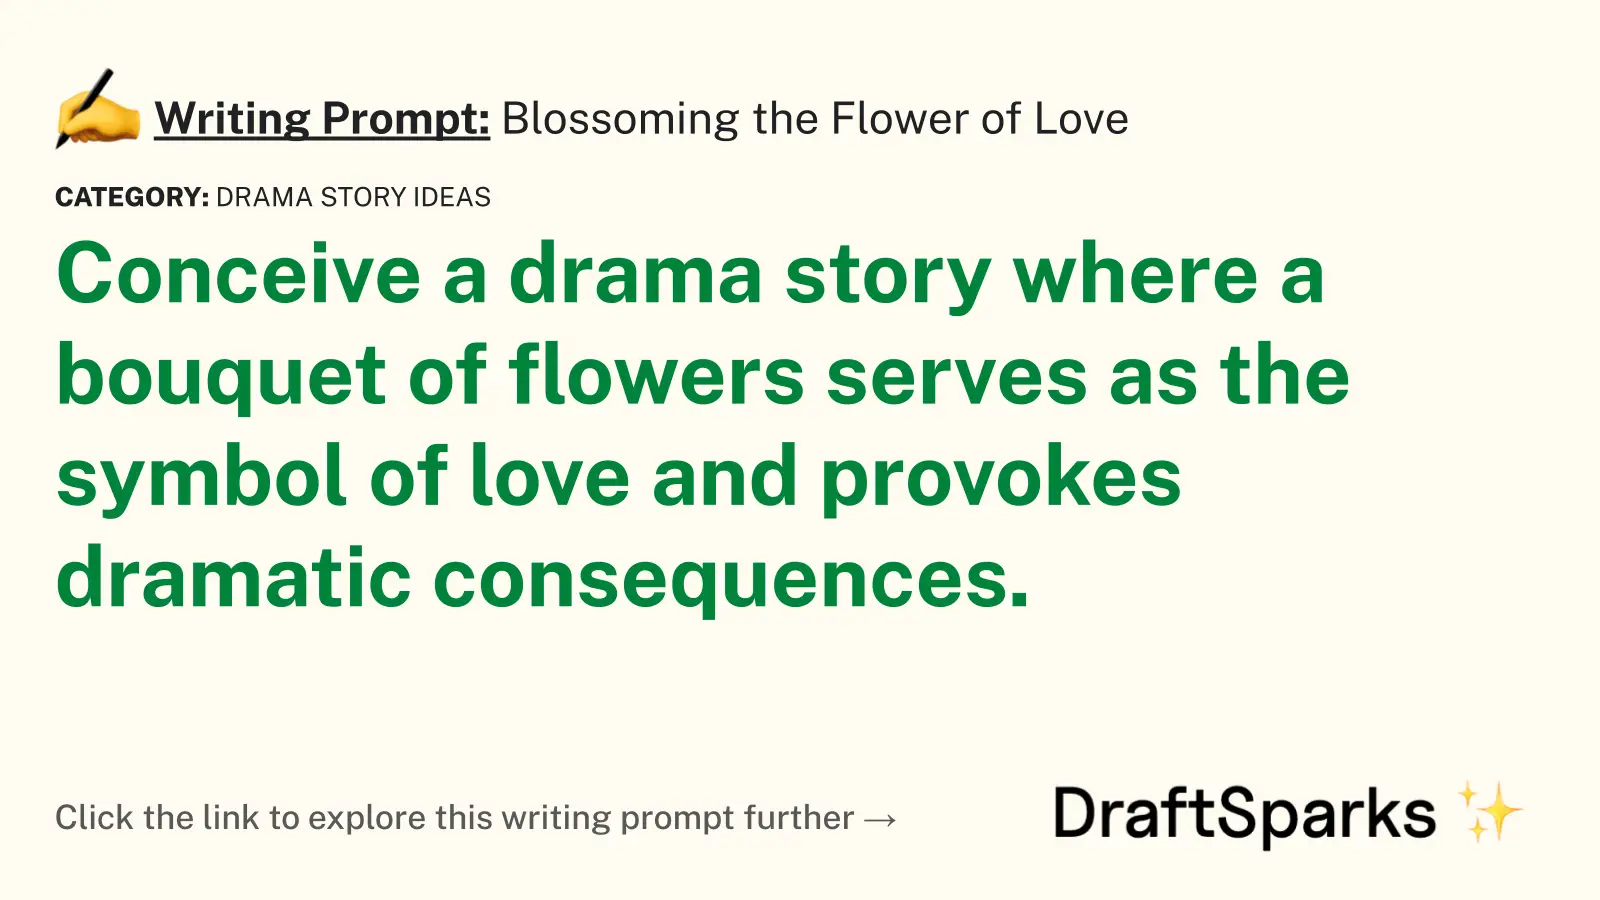 Blossoming the Flower of Love